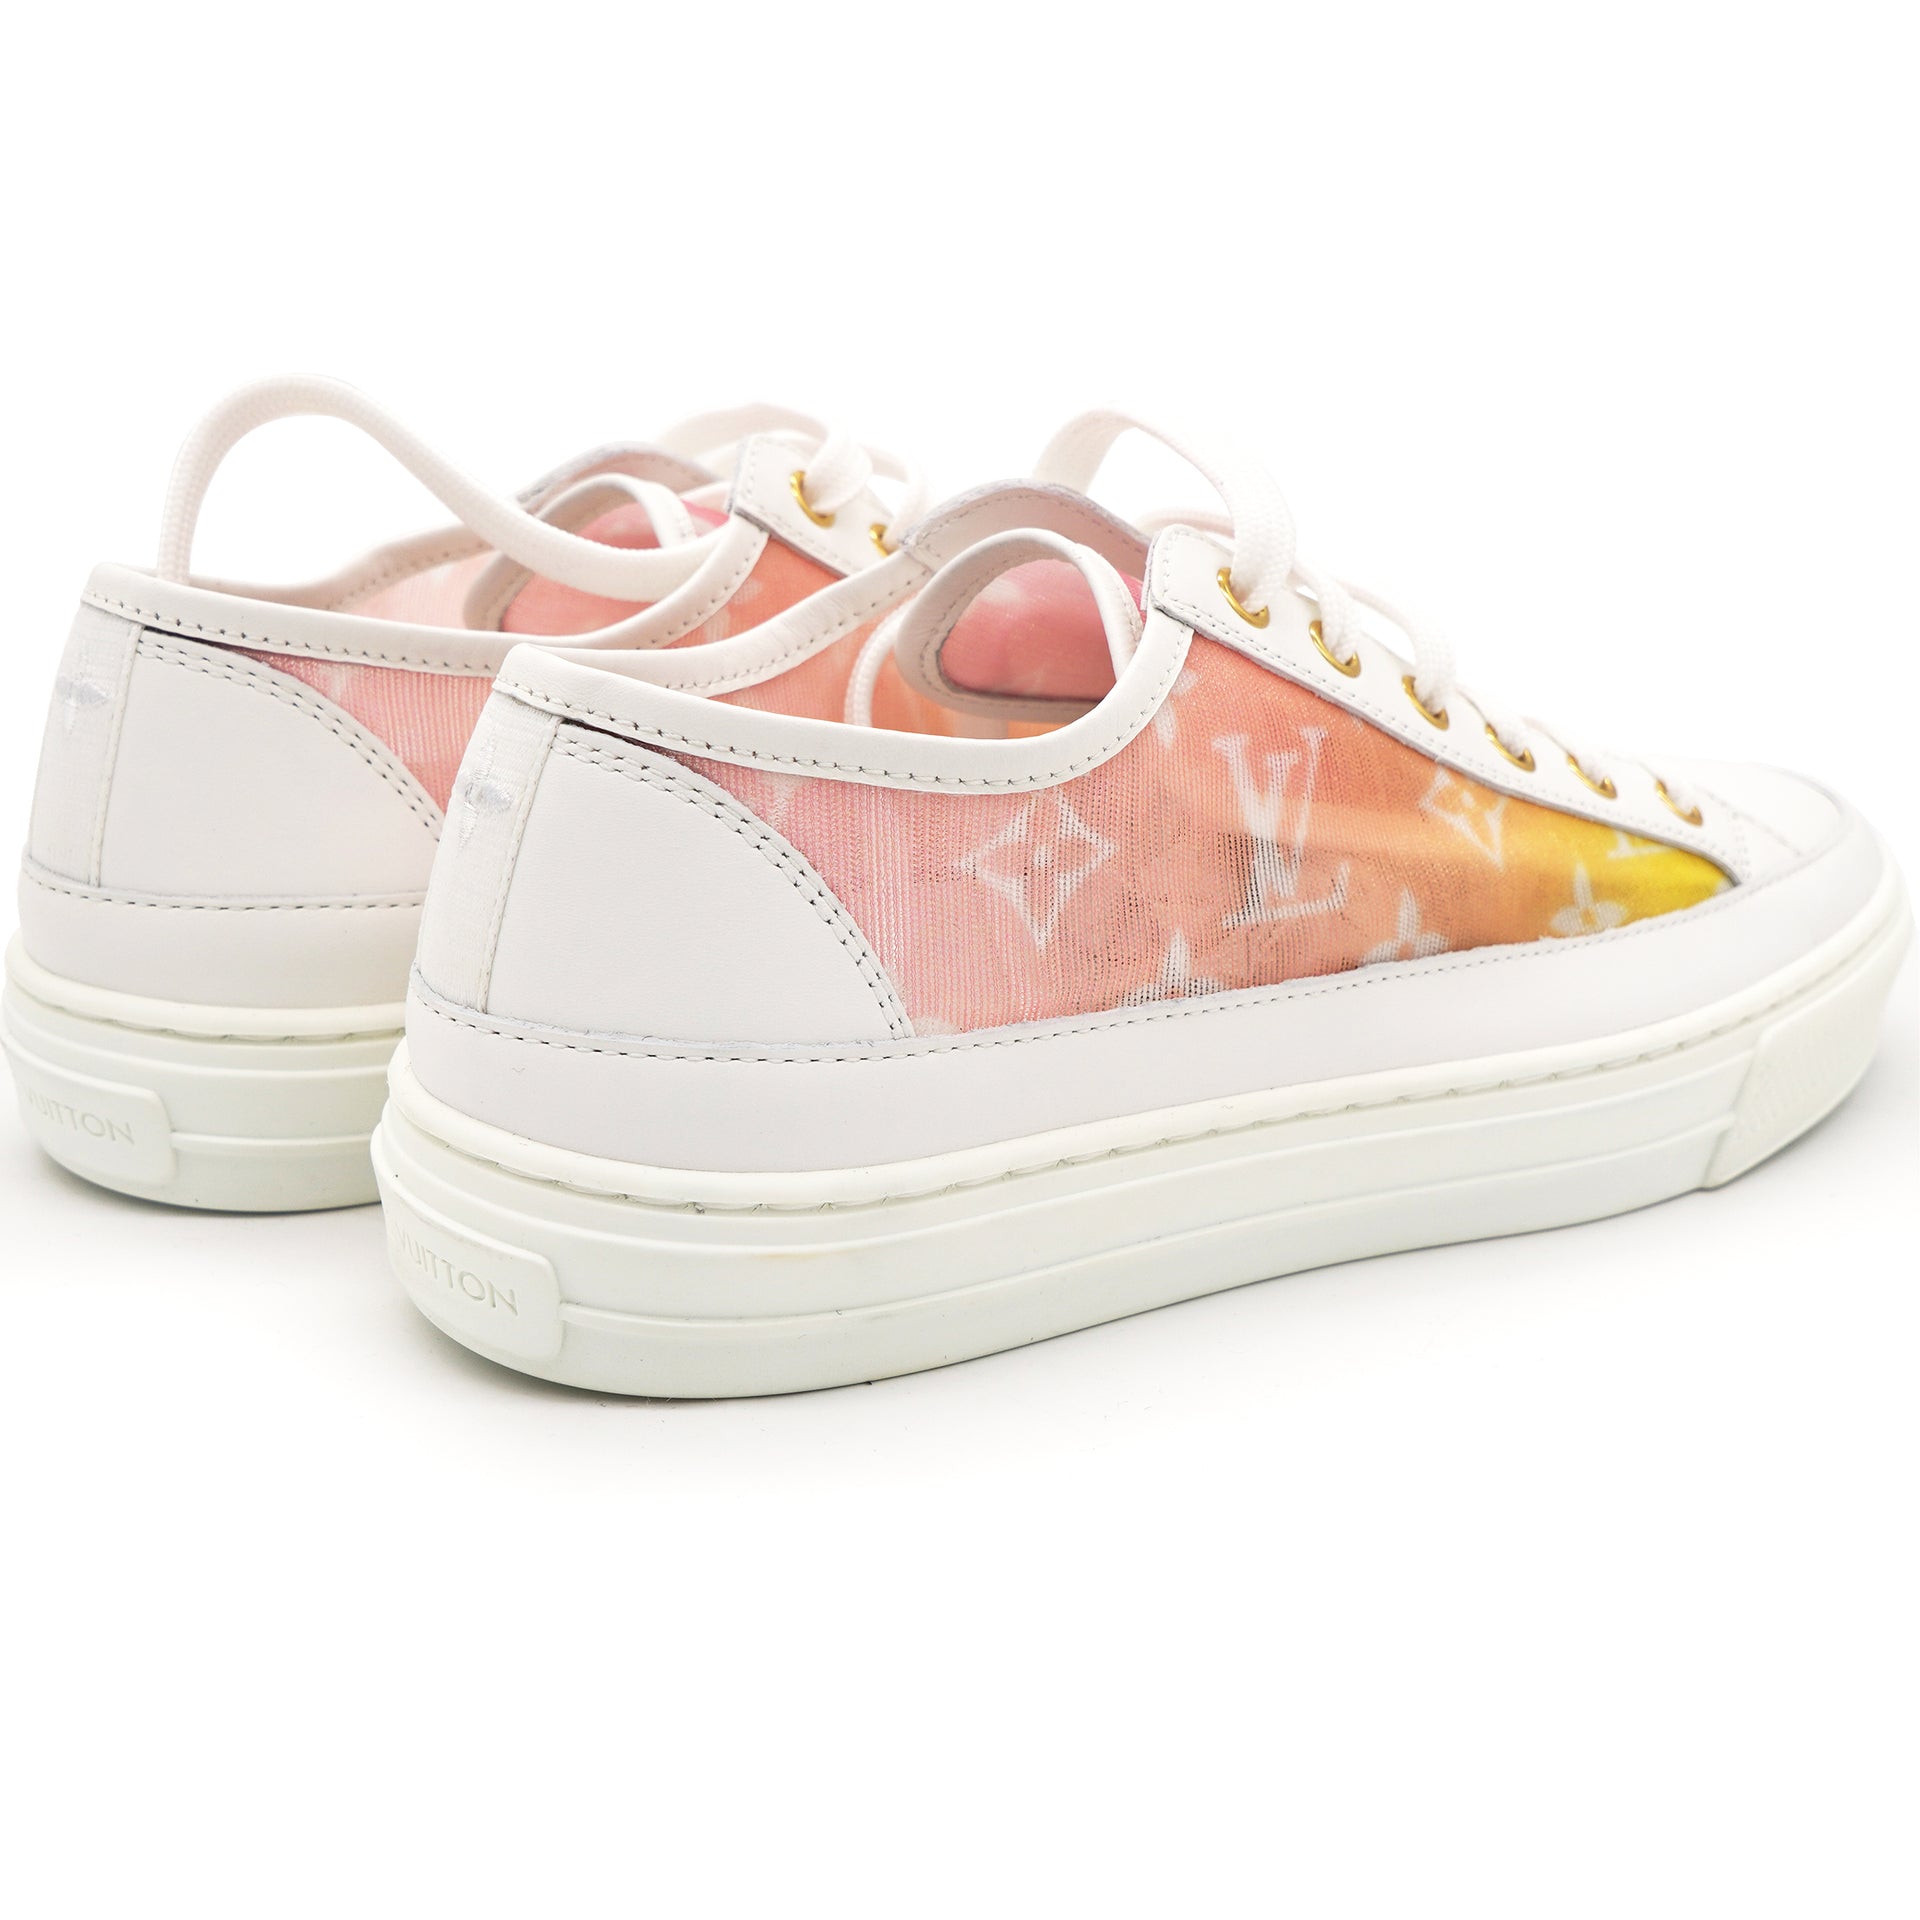 Louis Vuitton White/Pink Mesh and Leather High Top Stellar